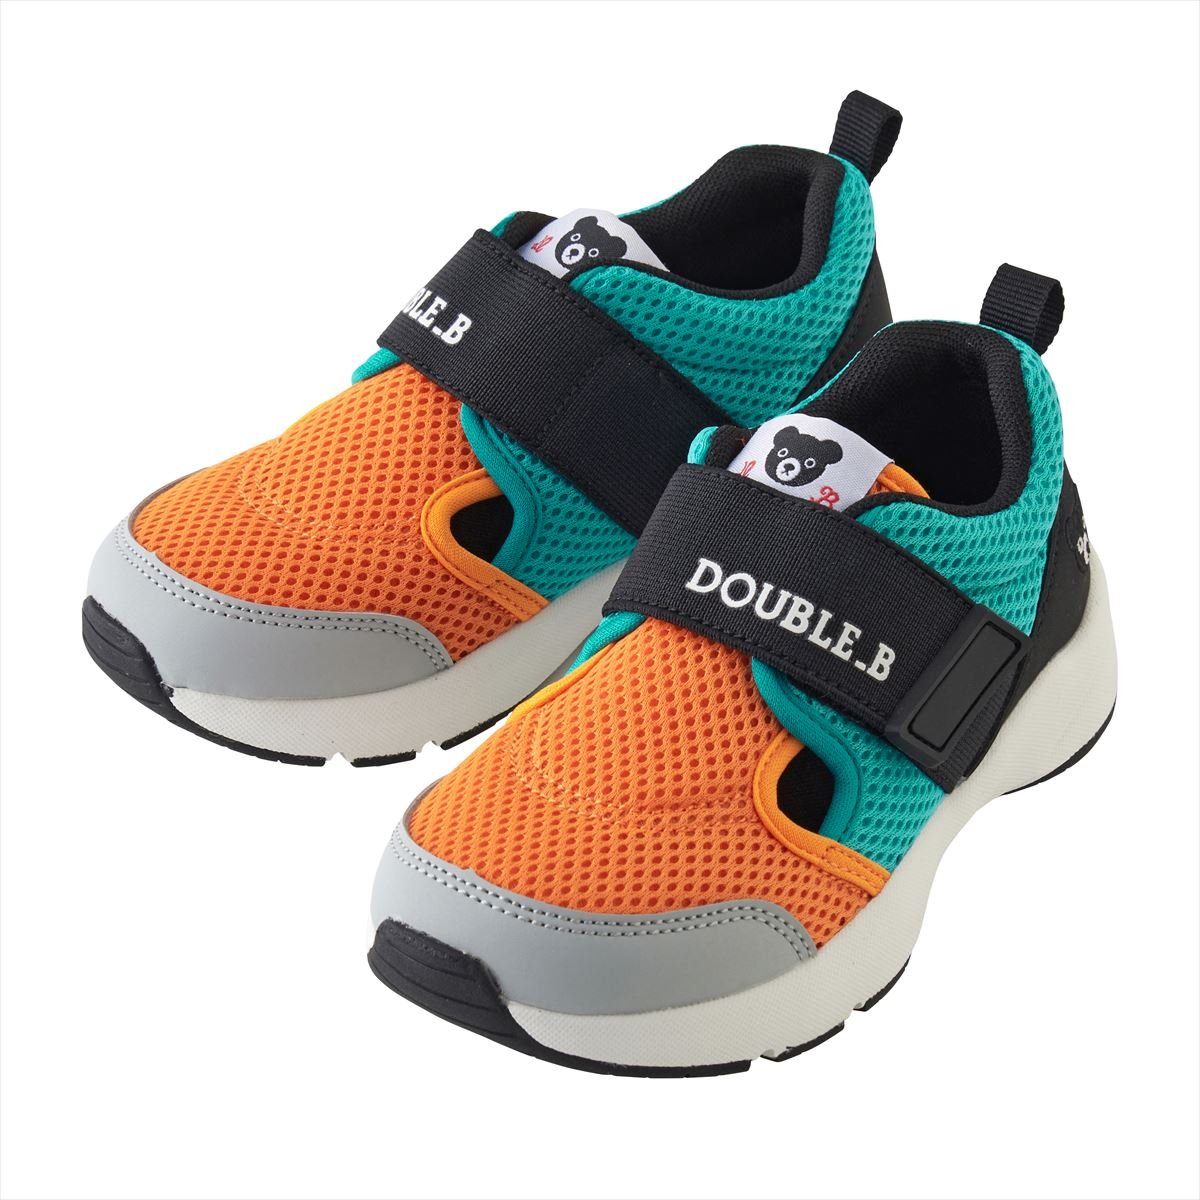 DOUBLE_B Double Russell Mesh Shoes - D for Dynamic - 62-9402-571-07-15